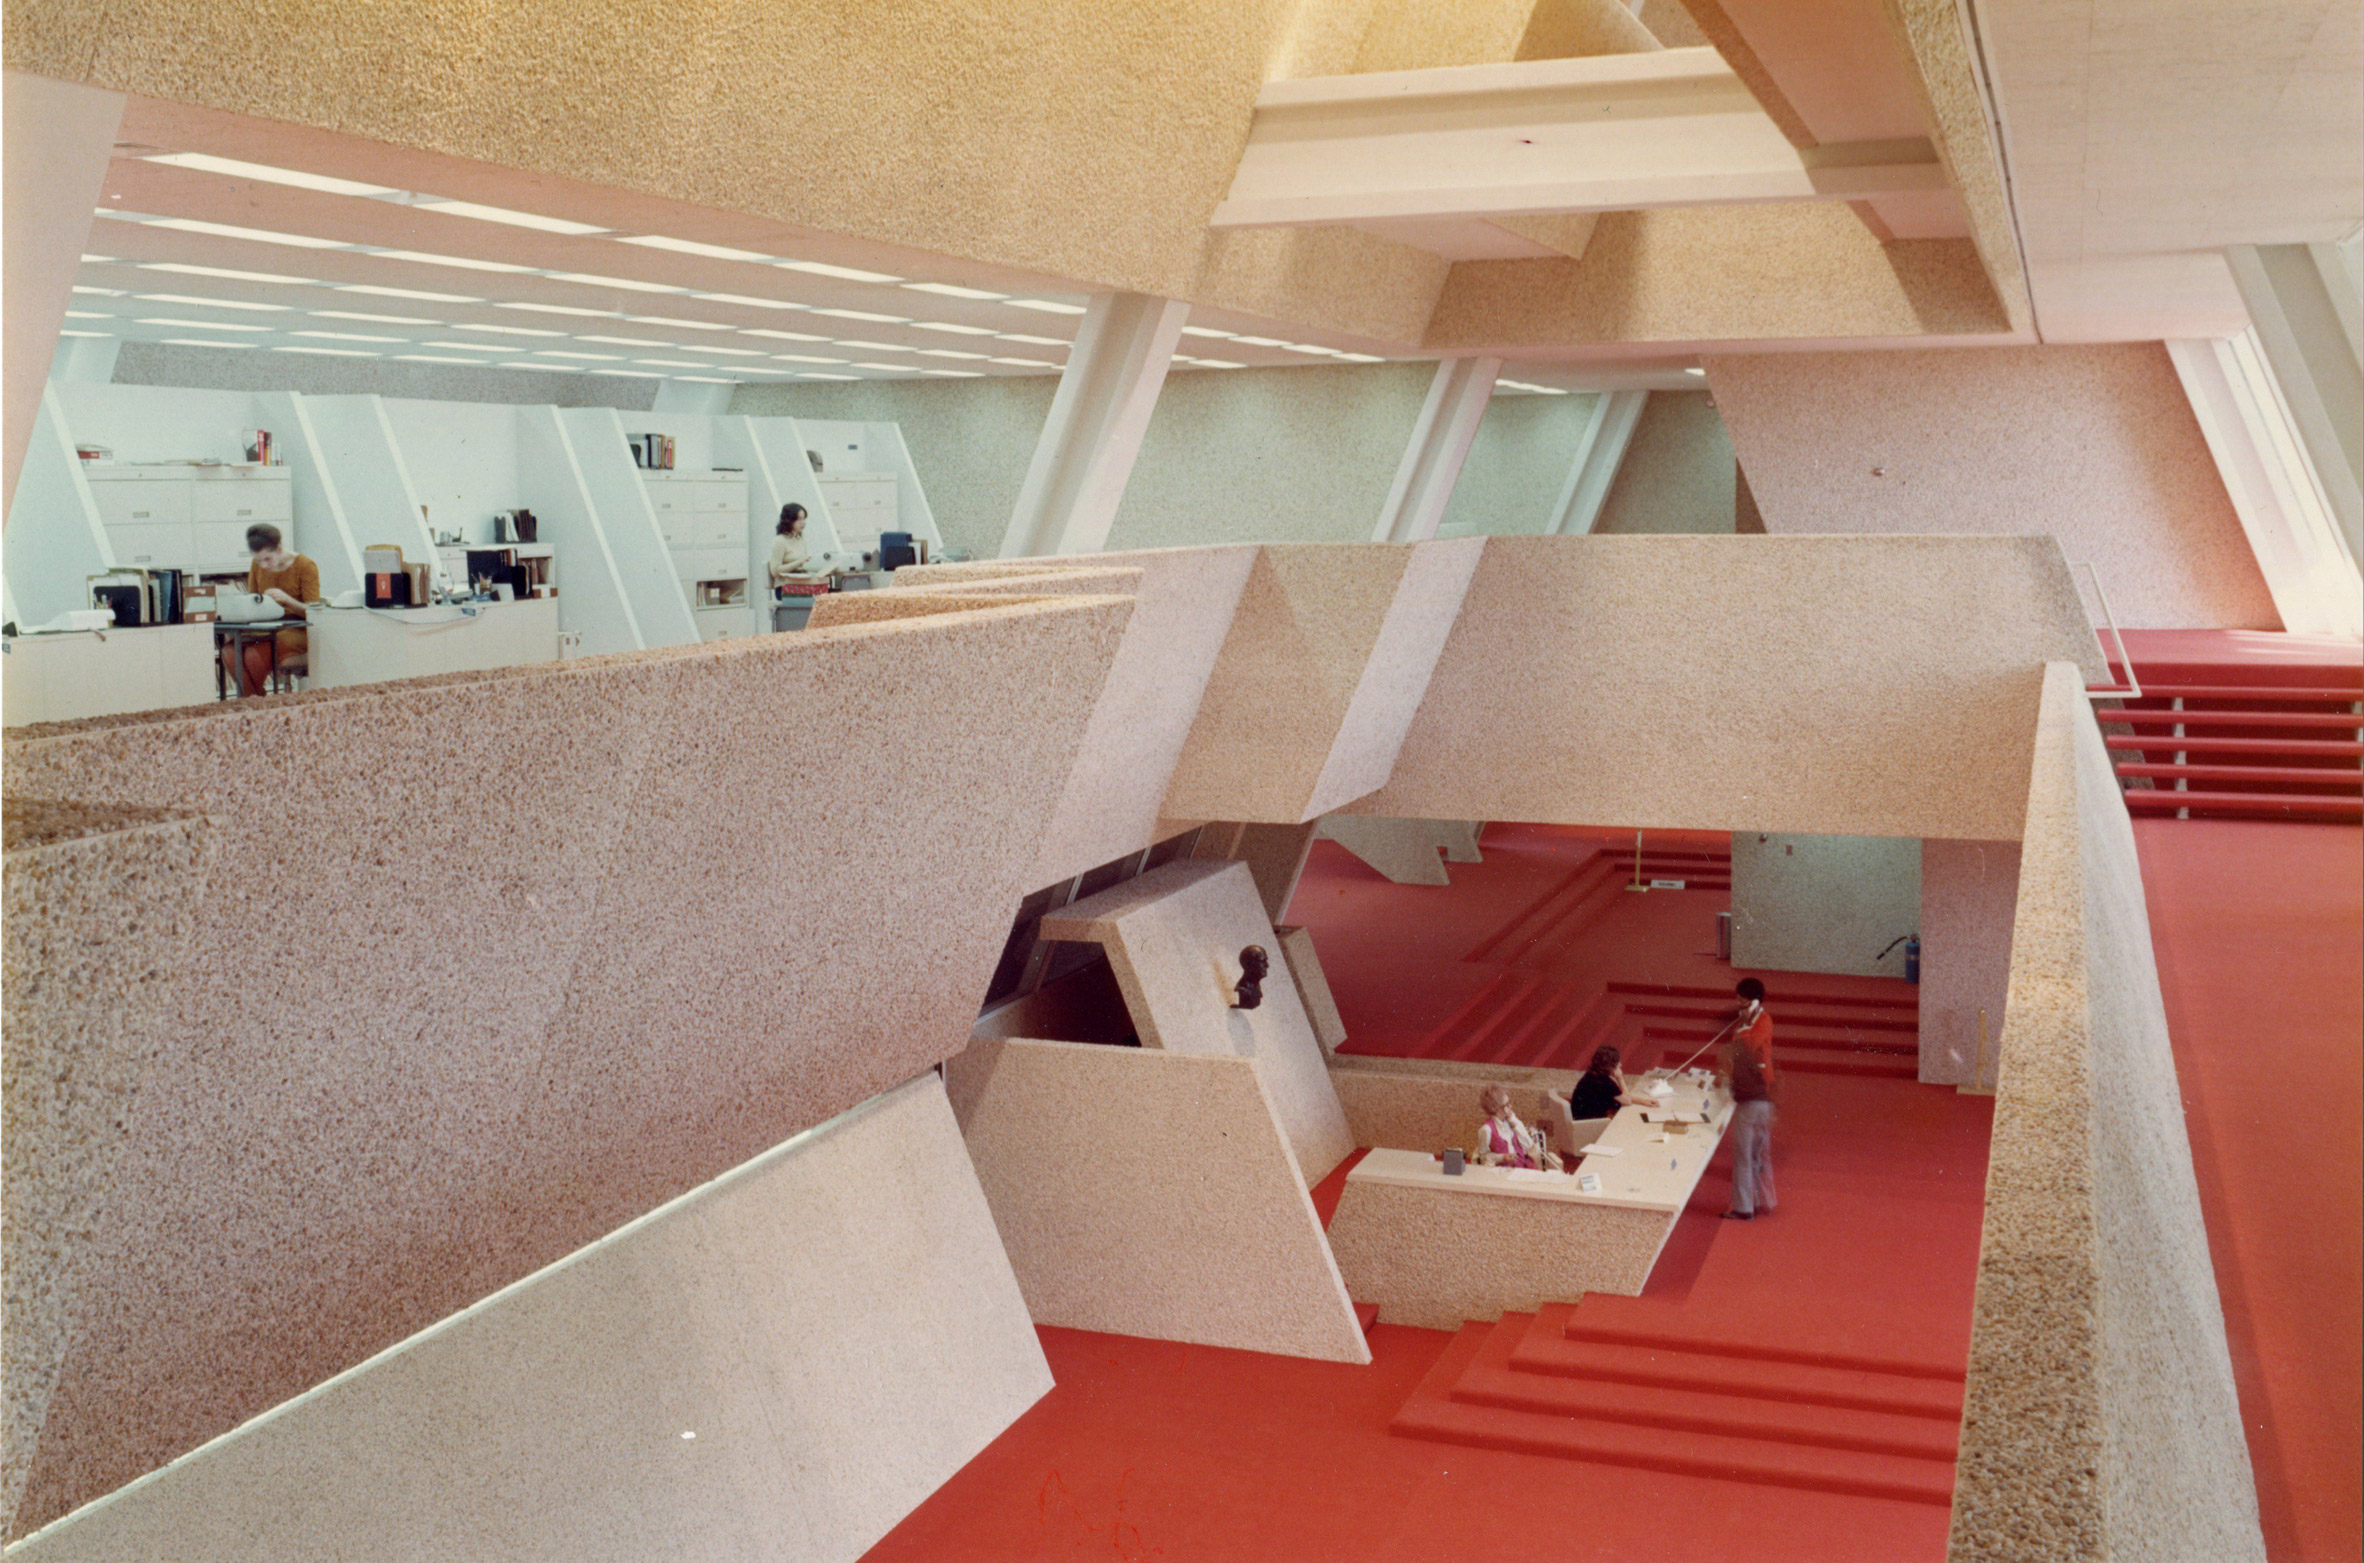 Interior of Burroughs Wellcome by Paul Rudolph